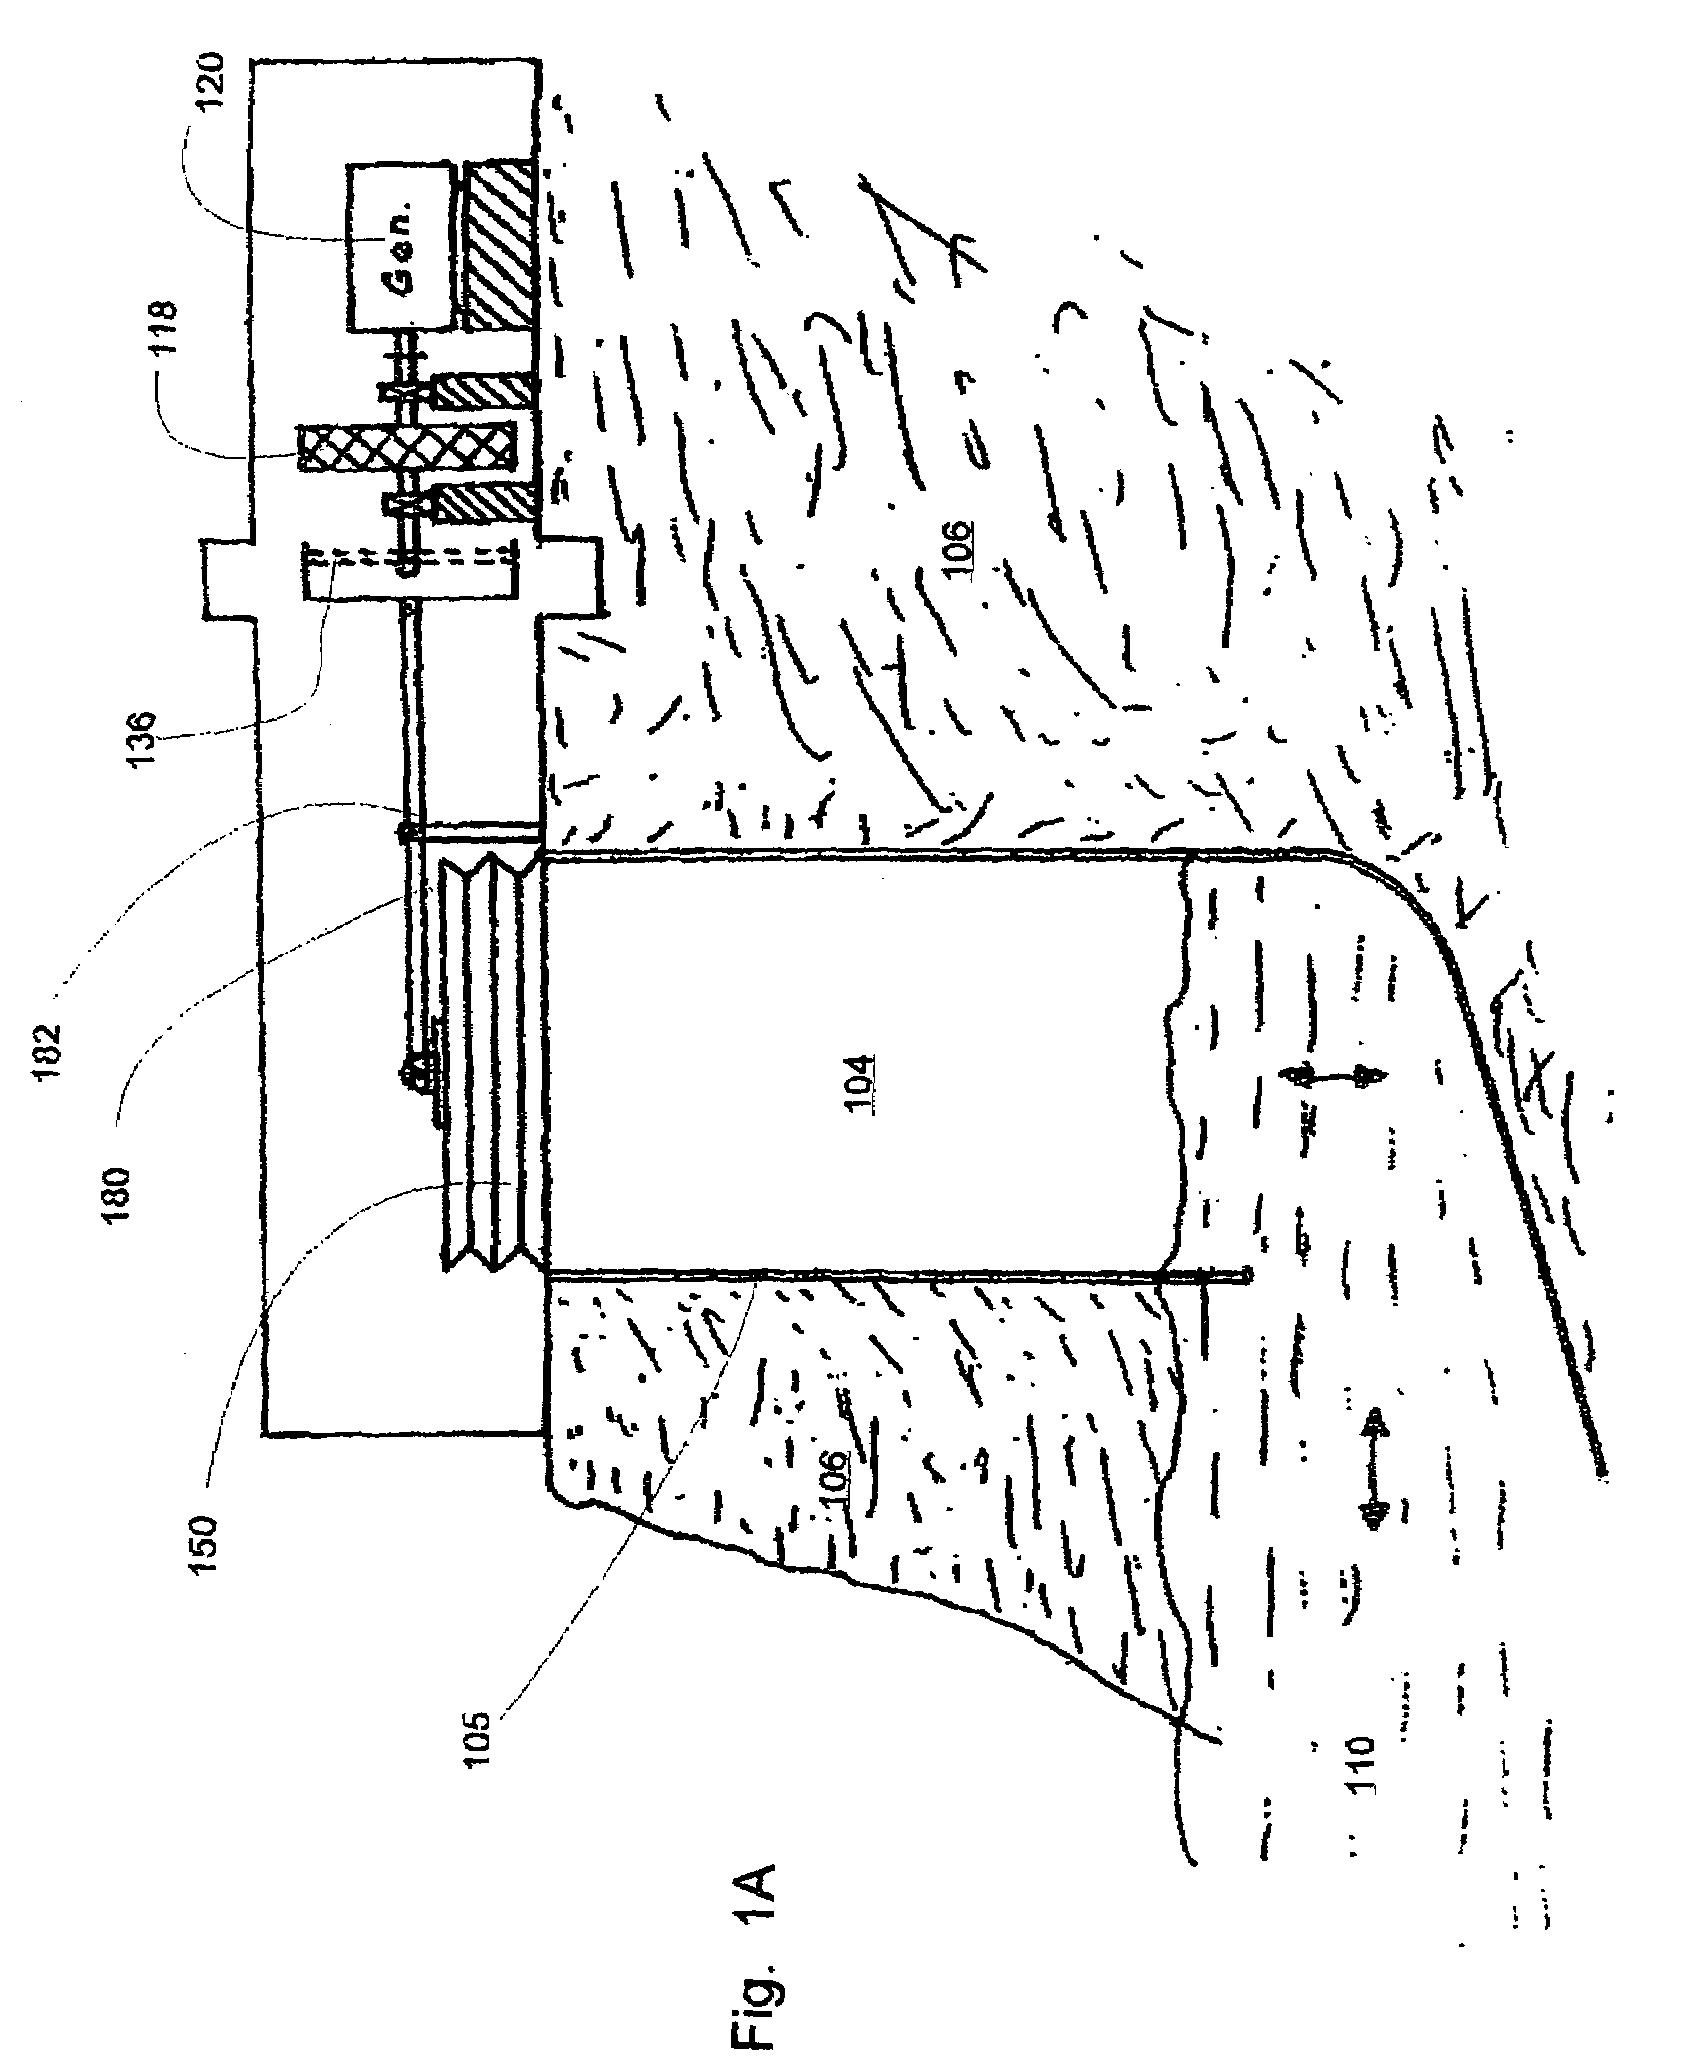 Apparatus for converting ocean wave energy to electrical energy